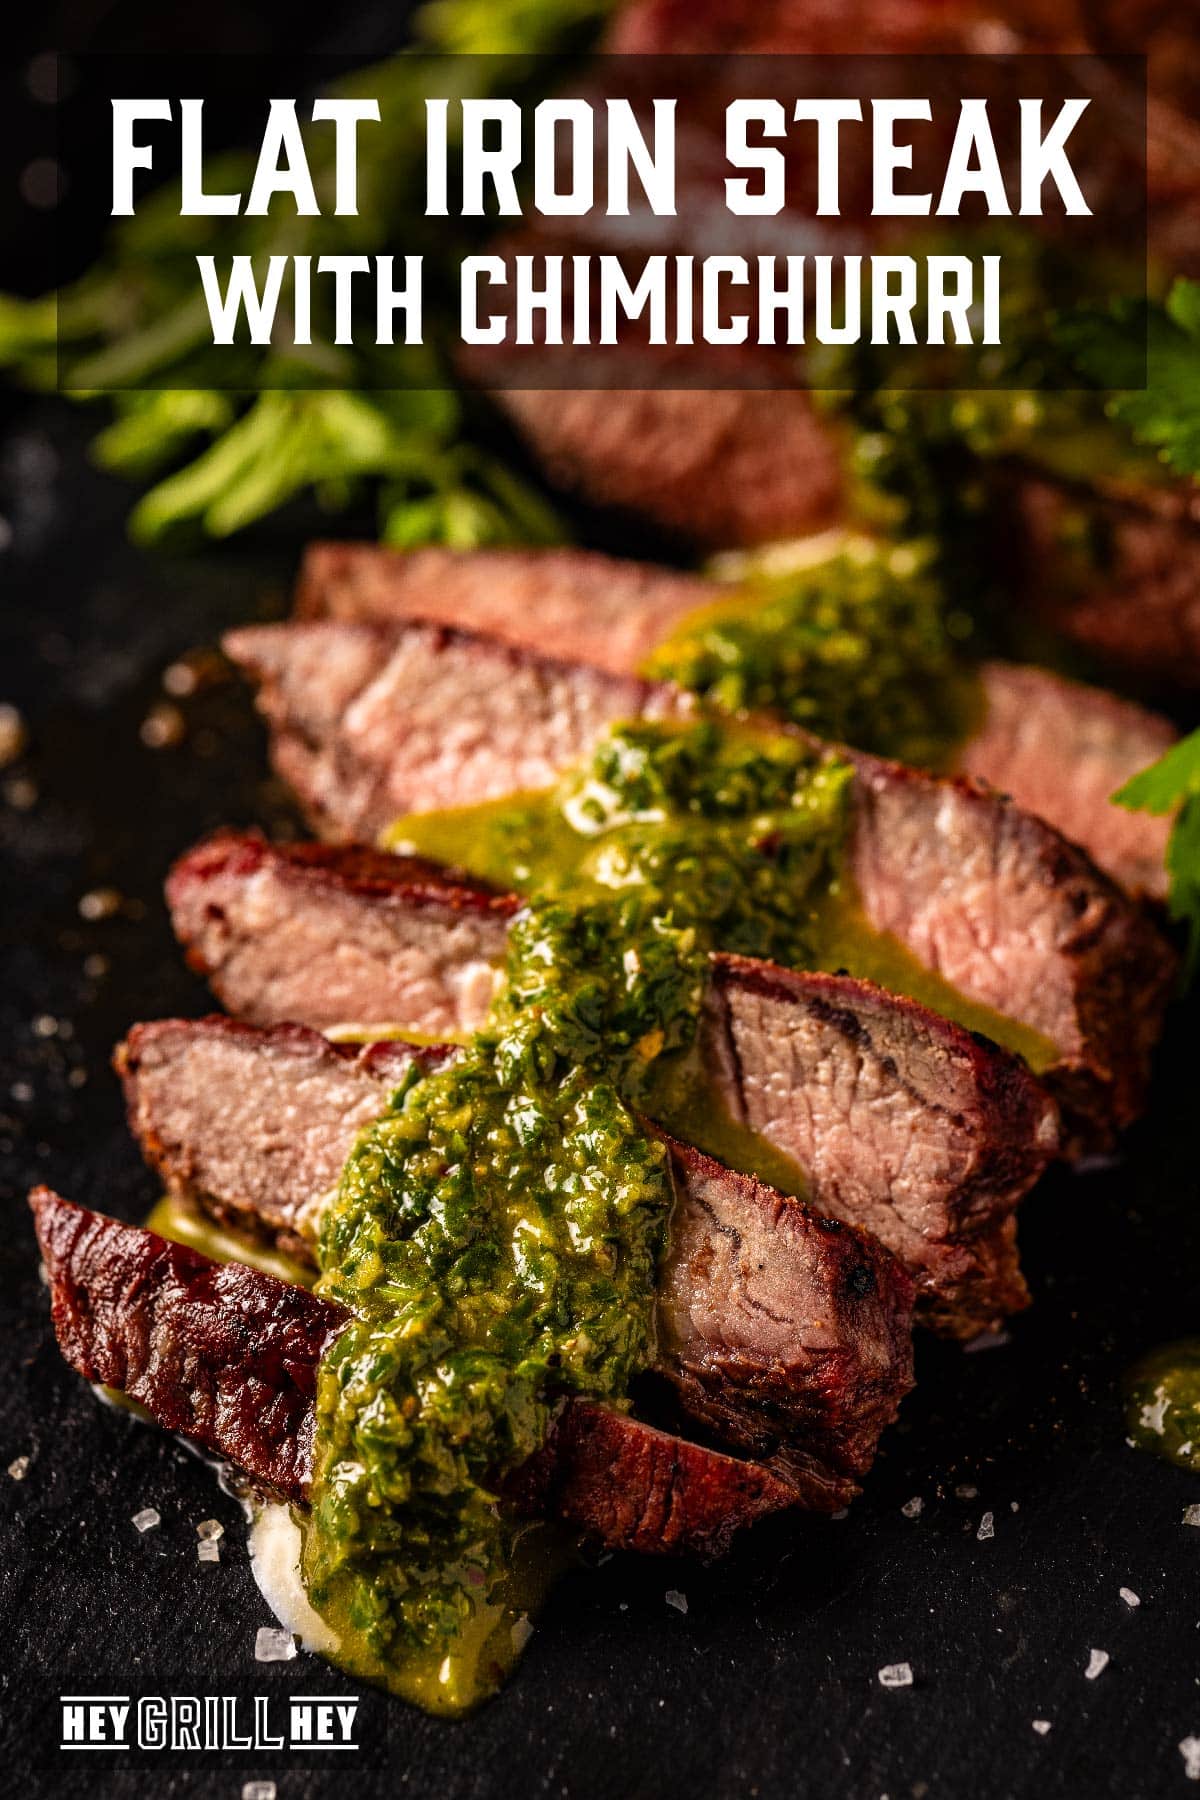 Sliced steamed topped with chimichurri sauce. Text reads "Flat Iron Steak with Chimichurri".